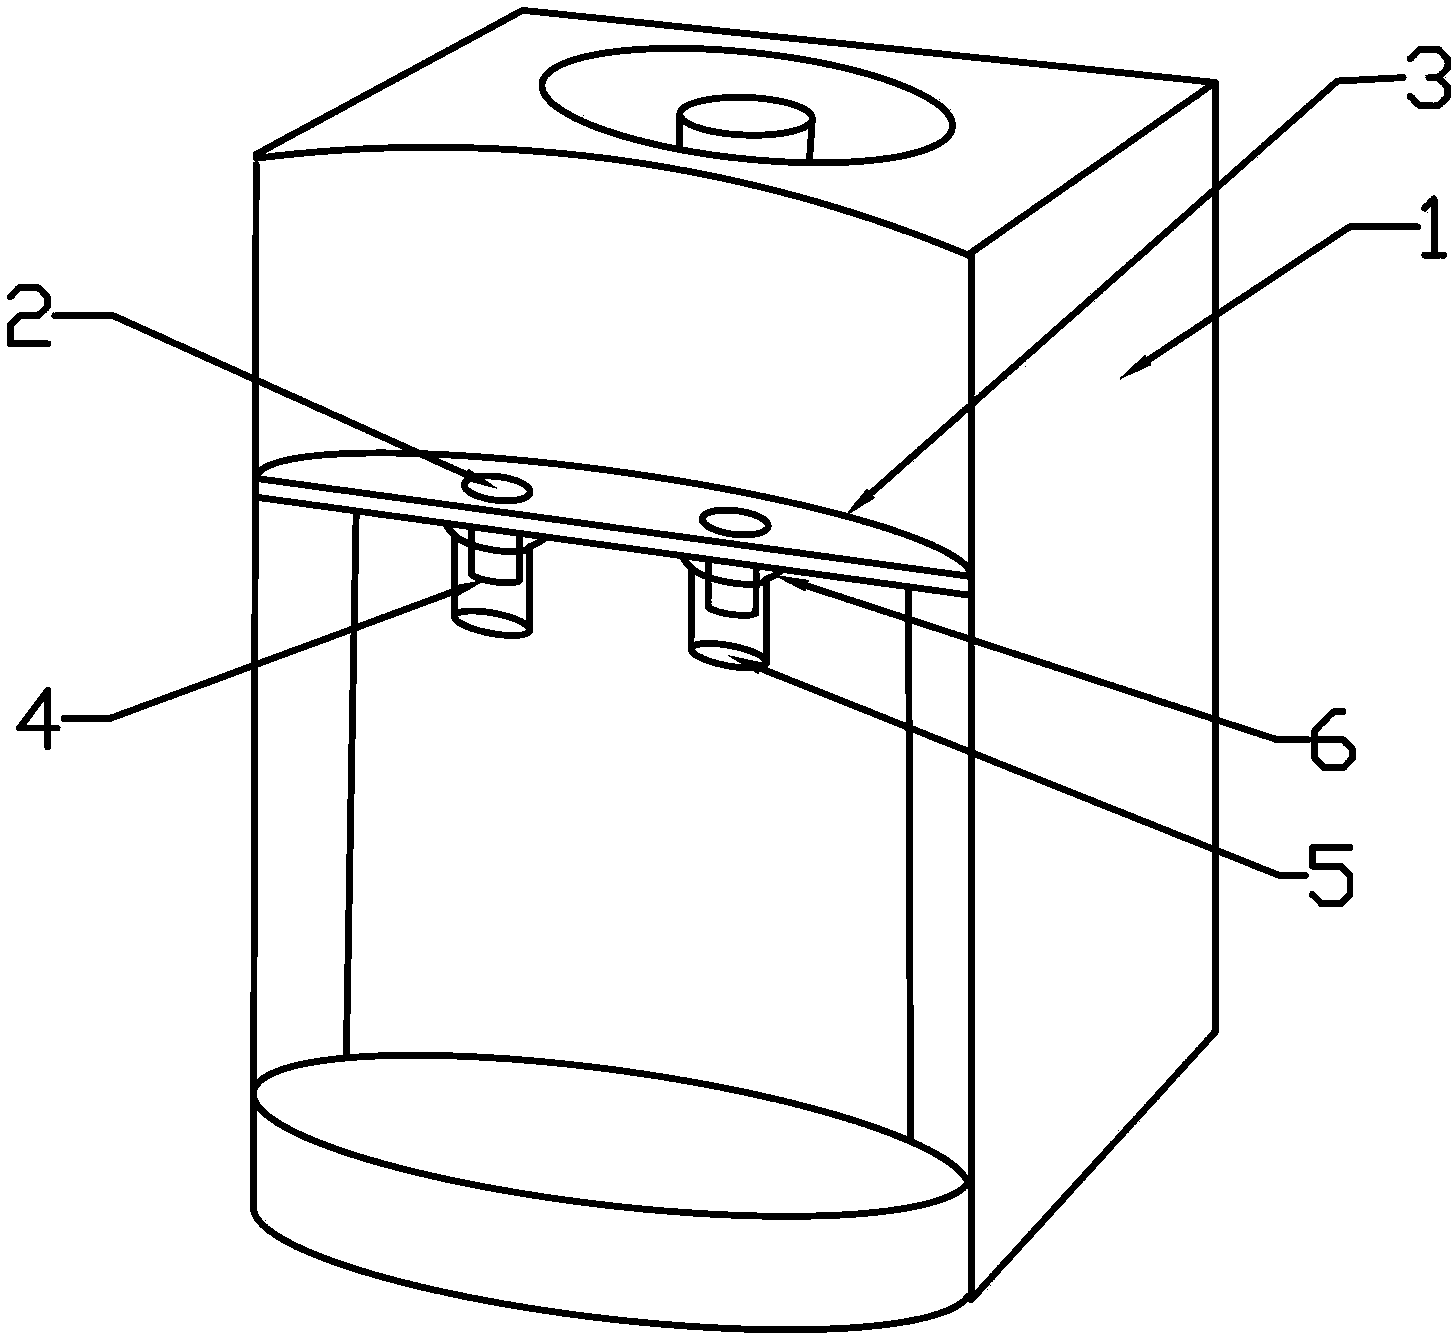 Contamination preventing cover for water dispenser opening